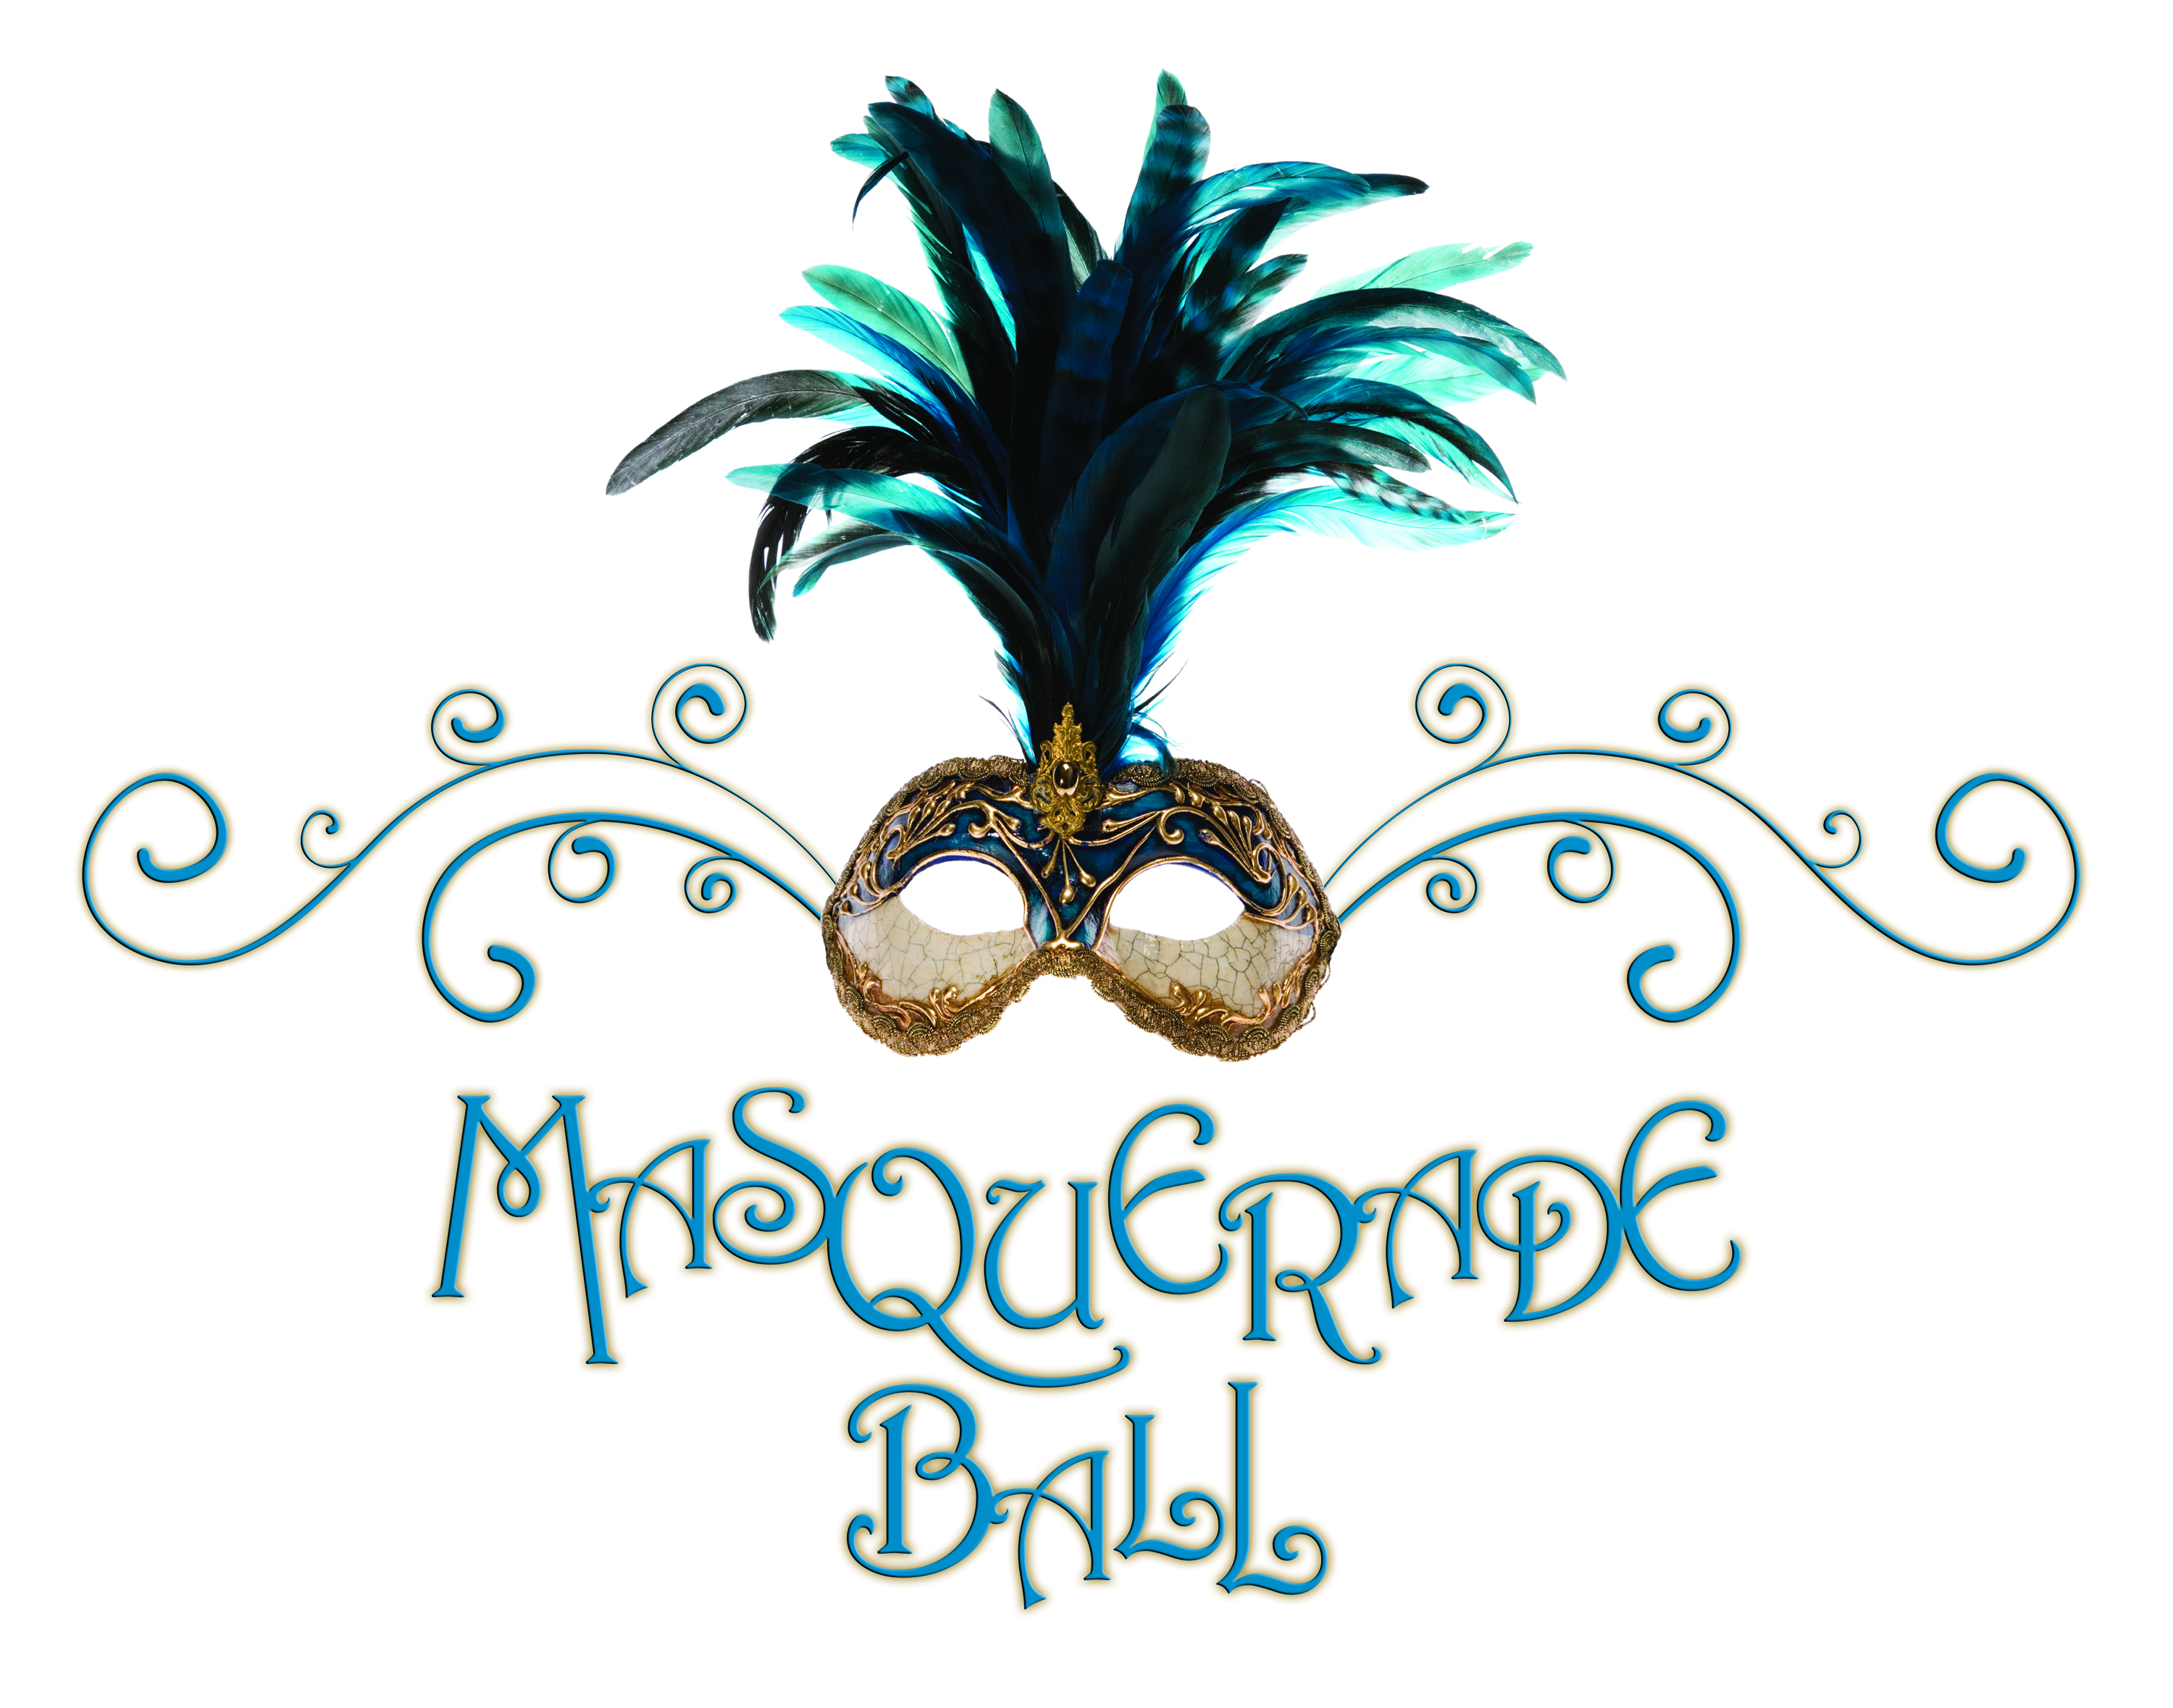 Masquerade Ball Clipart   Free Cliparts That You Can Download To You